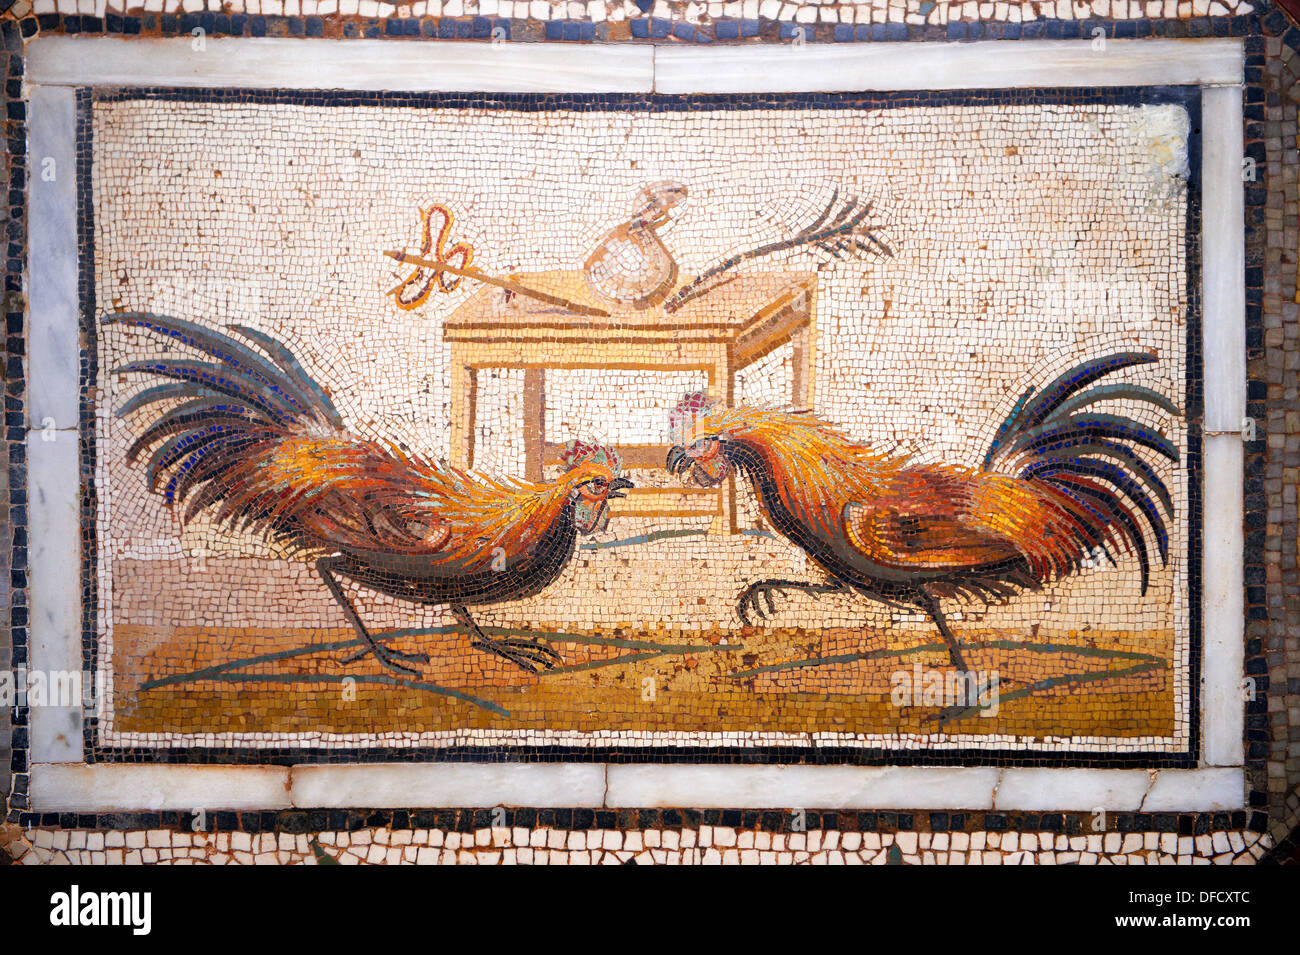 Roman Mosaic portrait of a Cockerel Fight from Pompei Archaeological Site. Naples Archaeological Museum Stock Photo